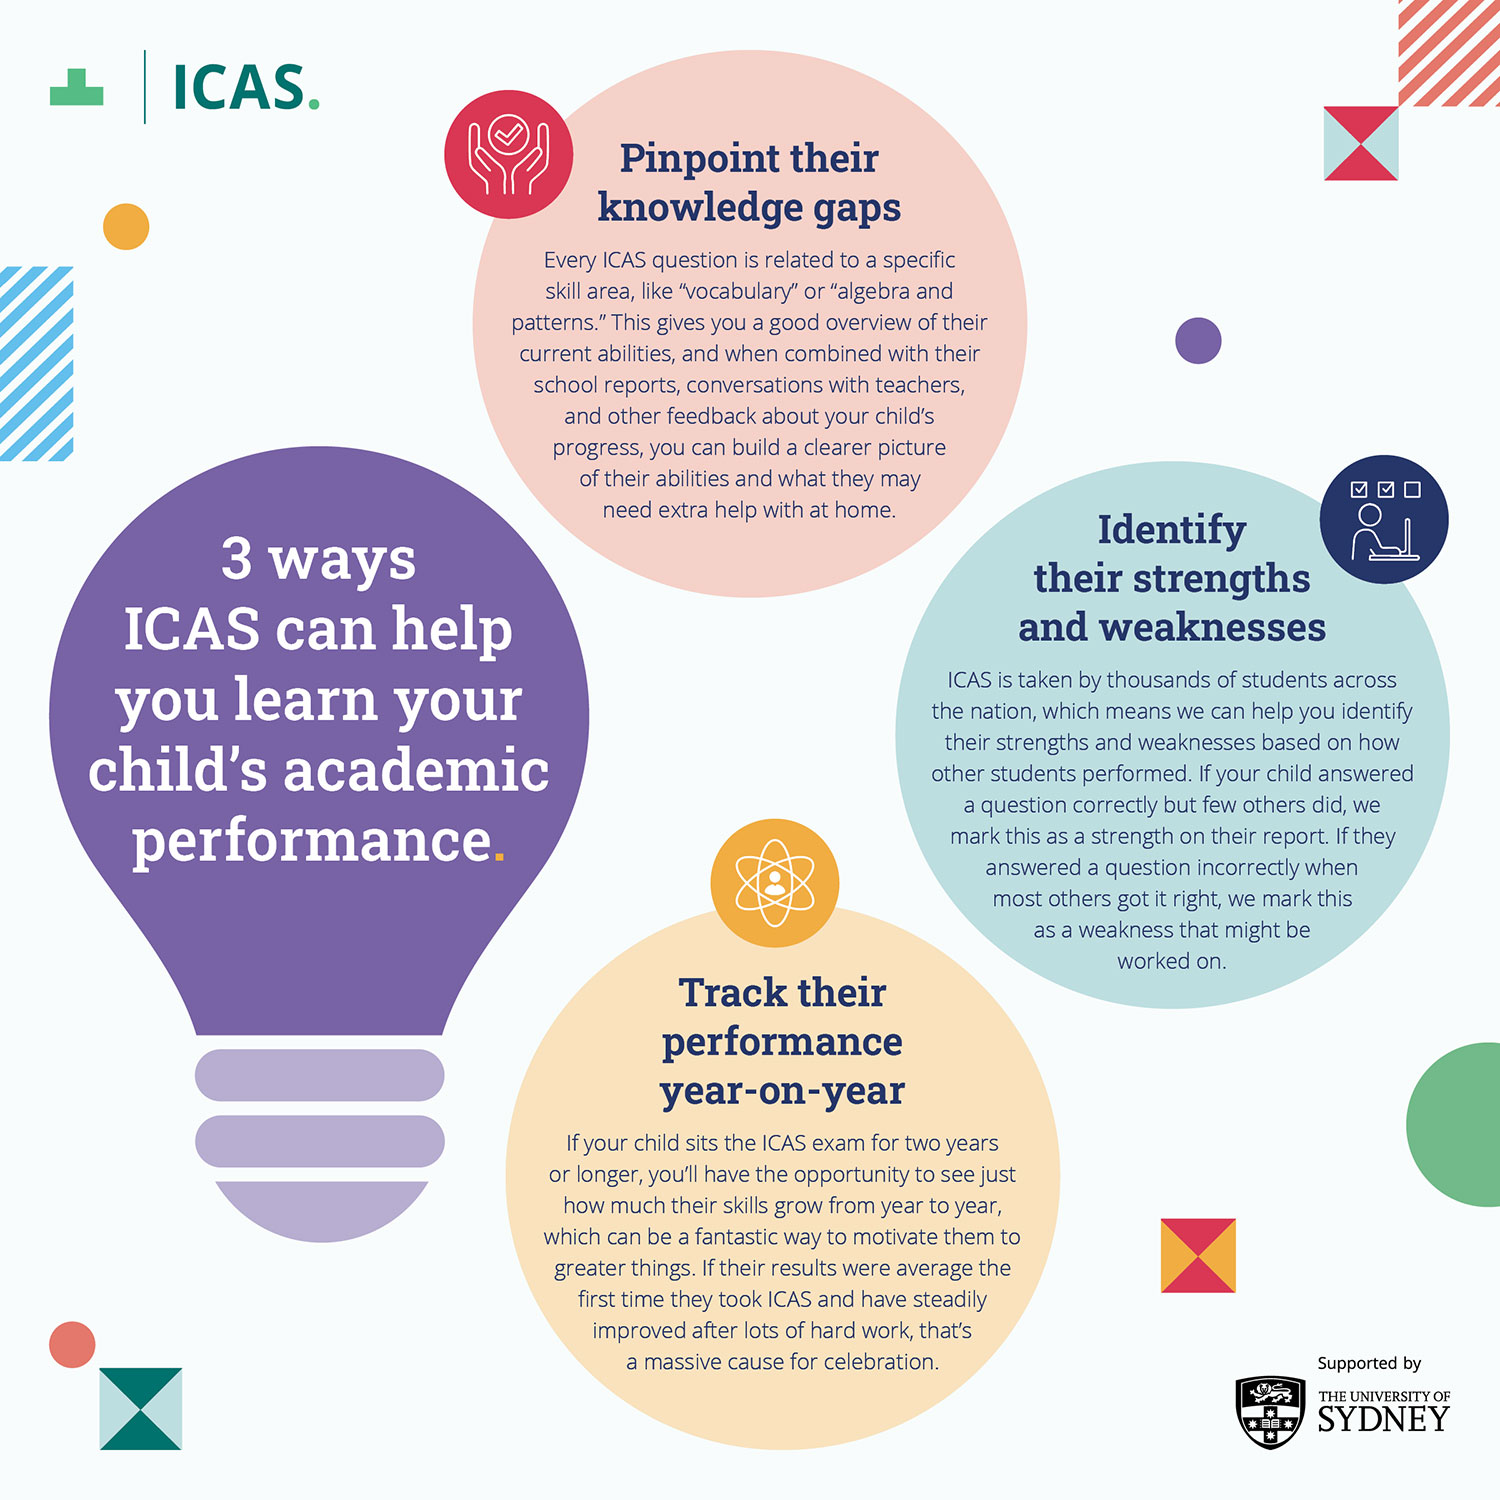 how to use icas results to learn your child's performance